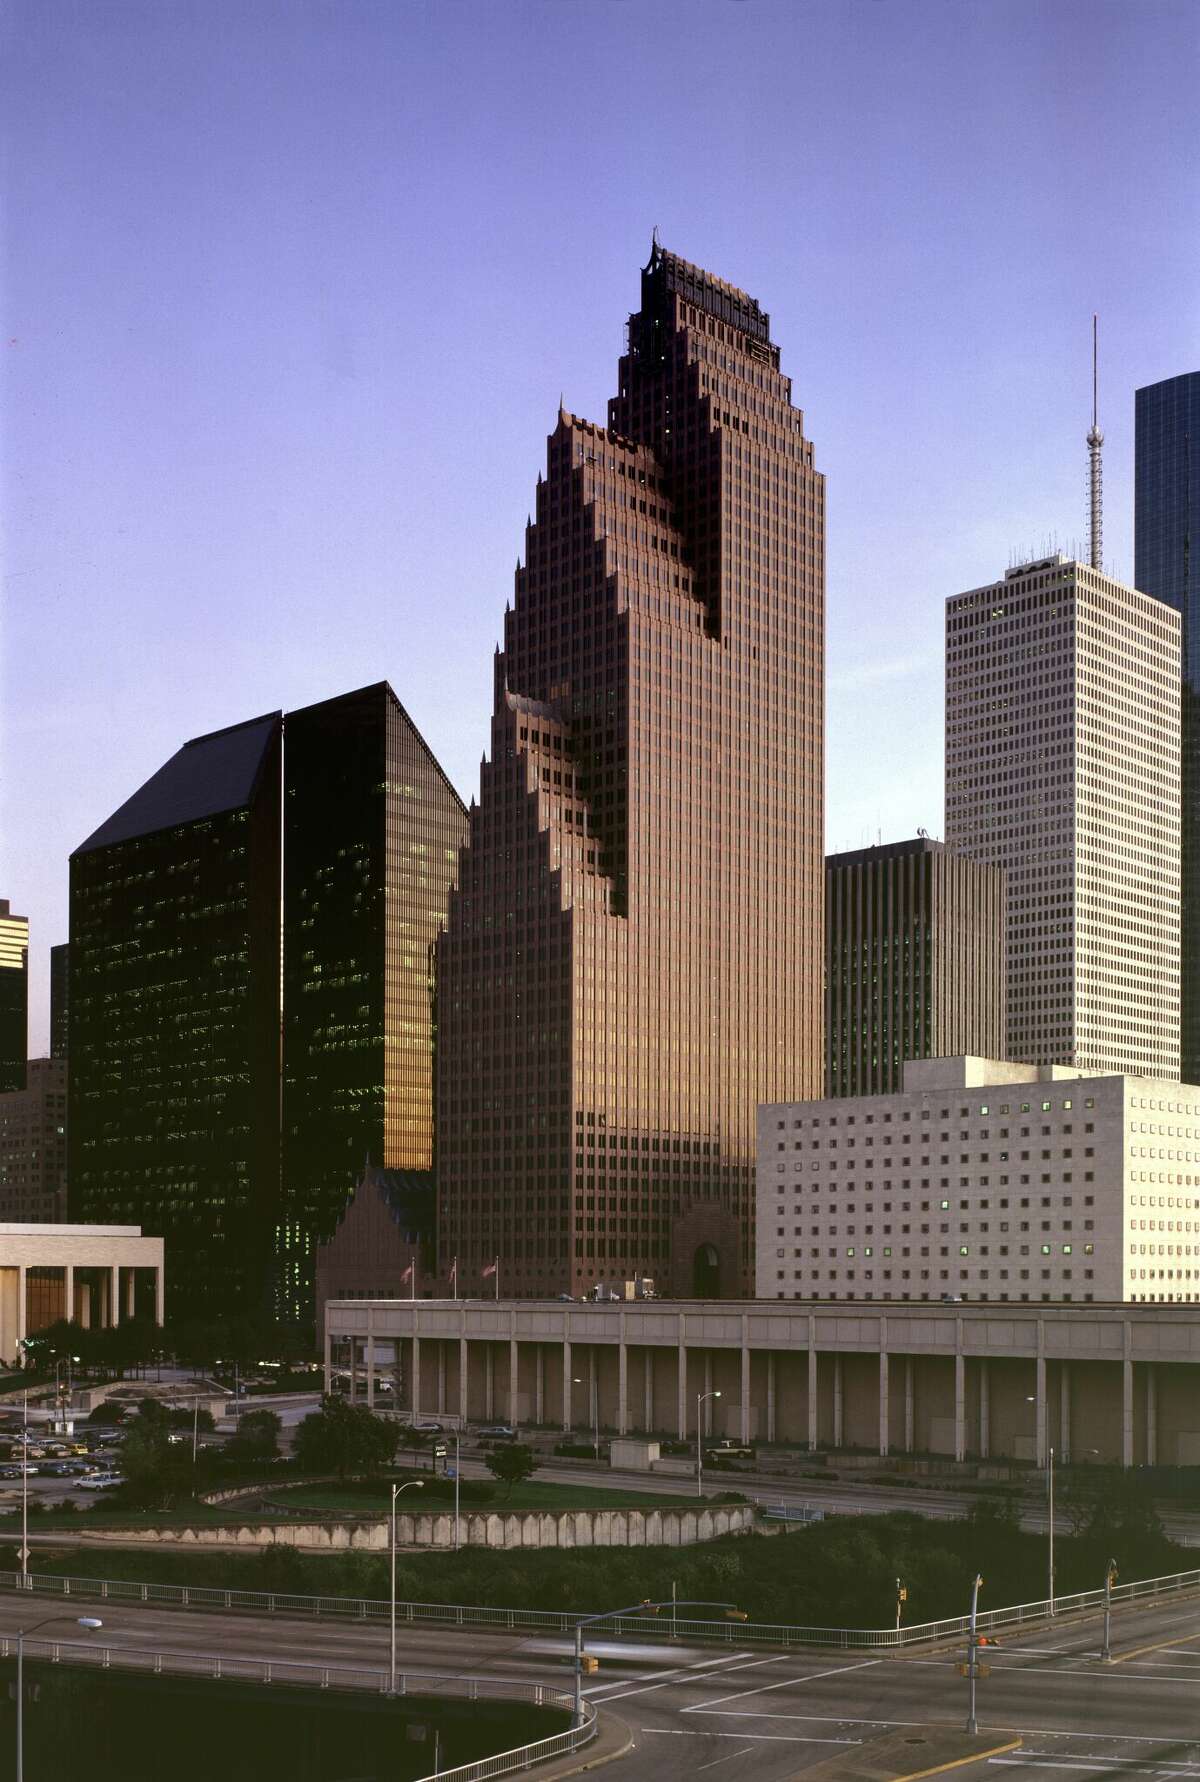 Some of the Houston office towers developed by Hines that opened in the 1970s and anchored by energy companies. Despite the region's economic diversity, energy companies have outsized sway on the value of goods and services produced in the region.